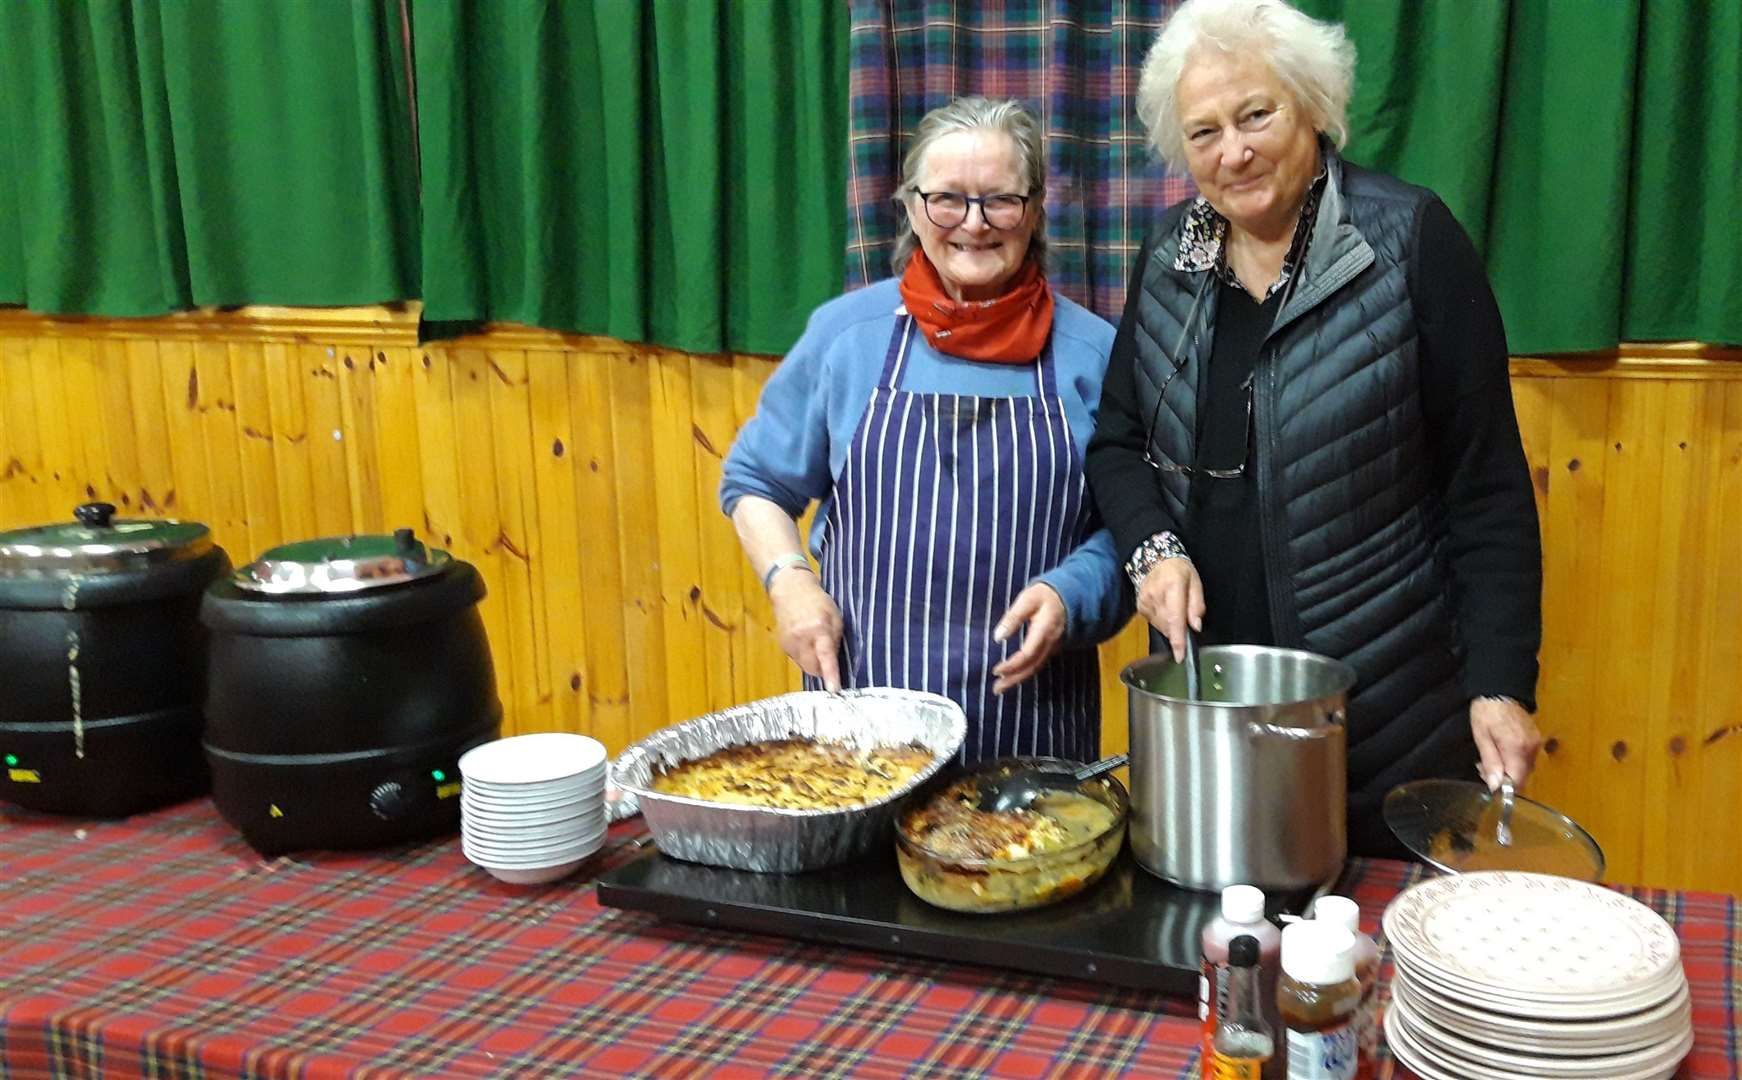 Care forum chairwoman Caroline Cousins (right) and trustee Charlotte Gibson, who was in charge of the cooking.